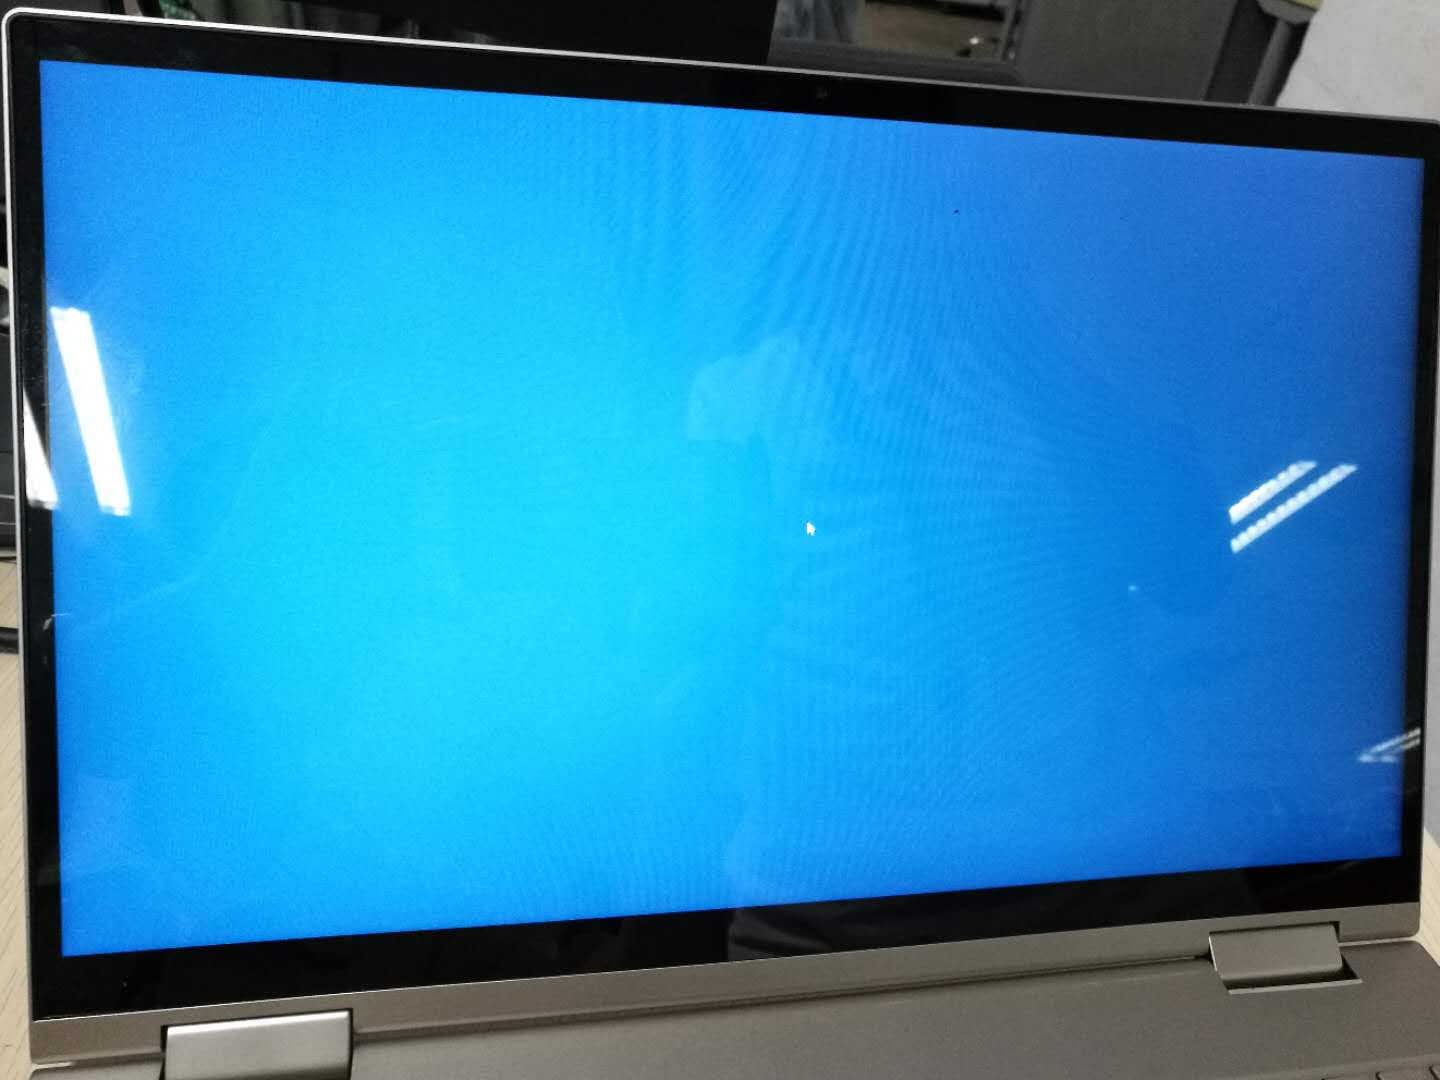 [19H1]Windows 10:system occurred blue or white screen when resuming from S4 and can not... 17ee58e7-f32f-4394-a2d9-c650c2ae9d2f?upload=true.jpg